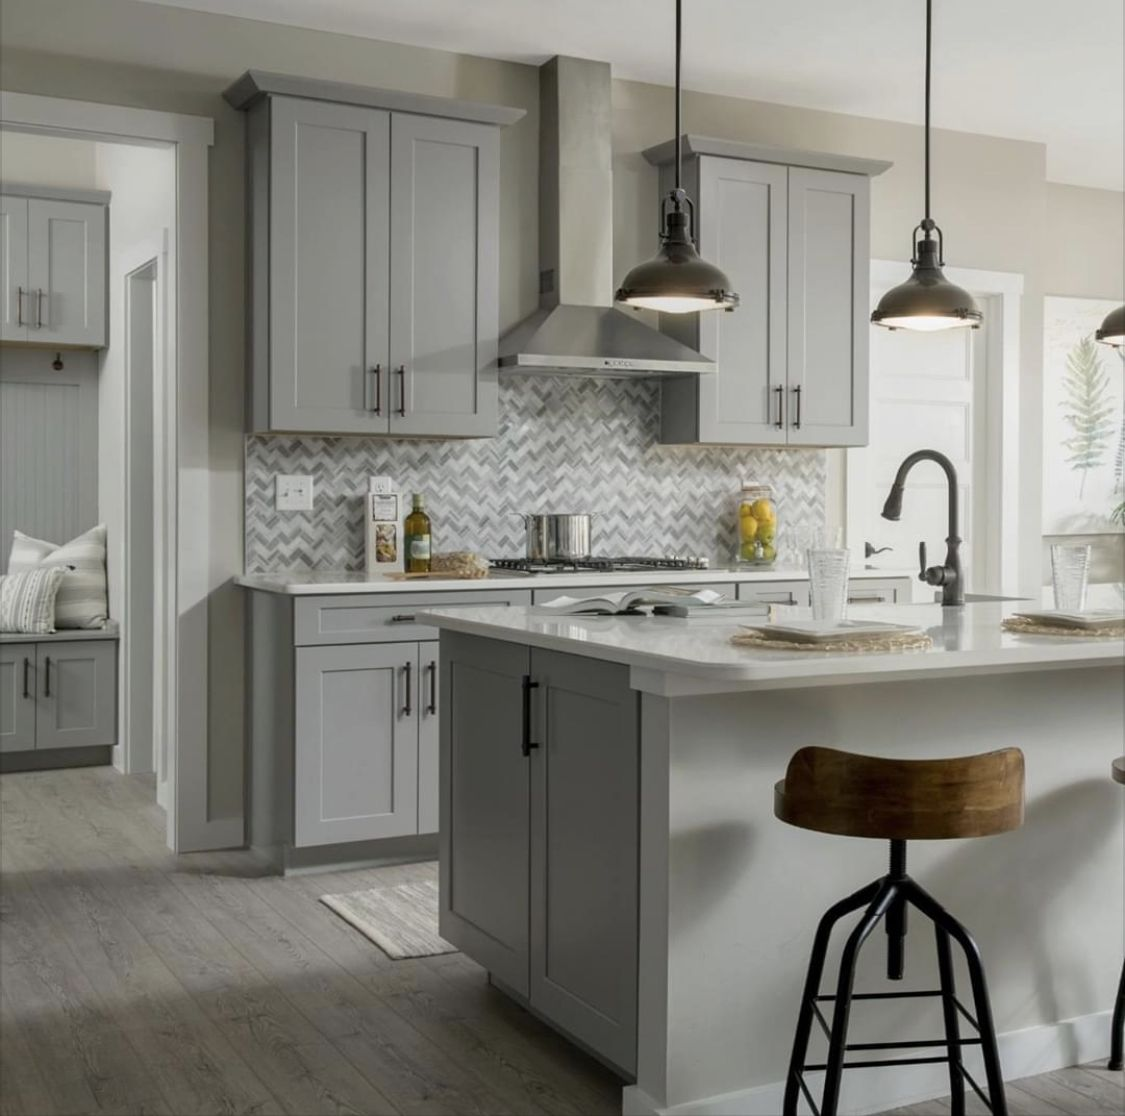 Agreeable Gray On Cabinets